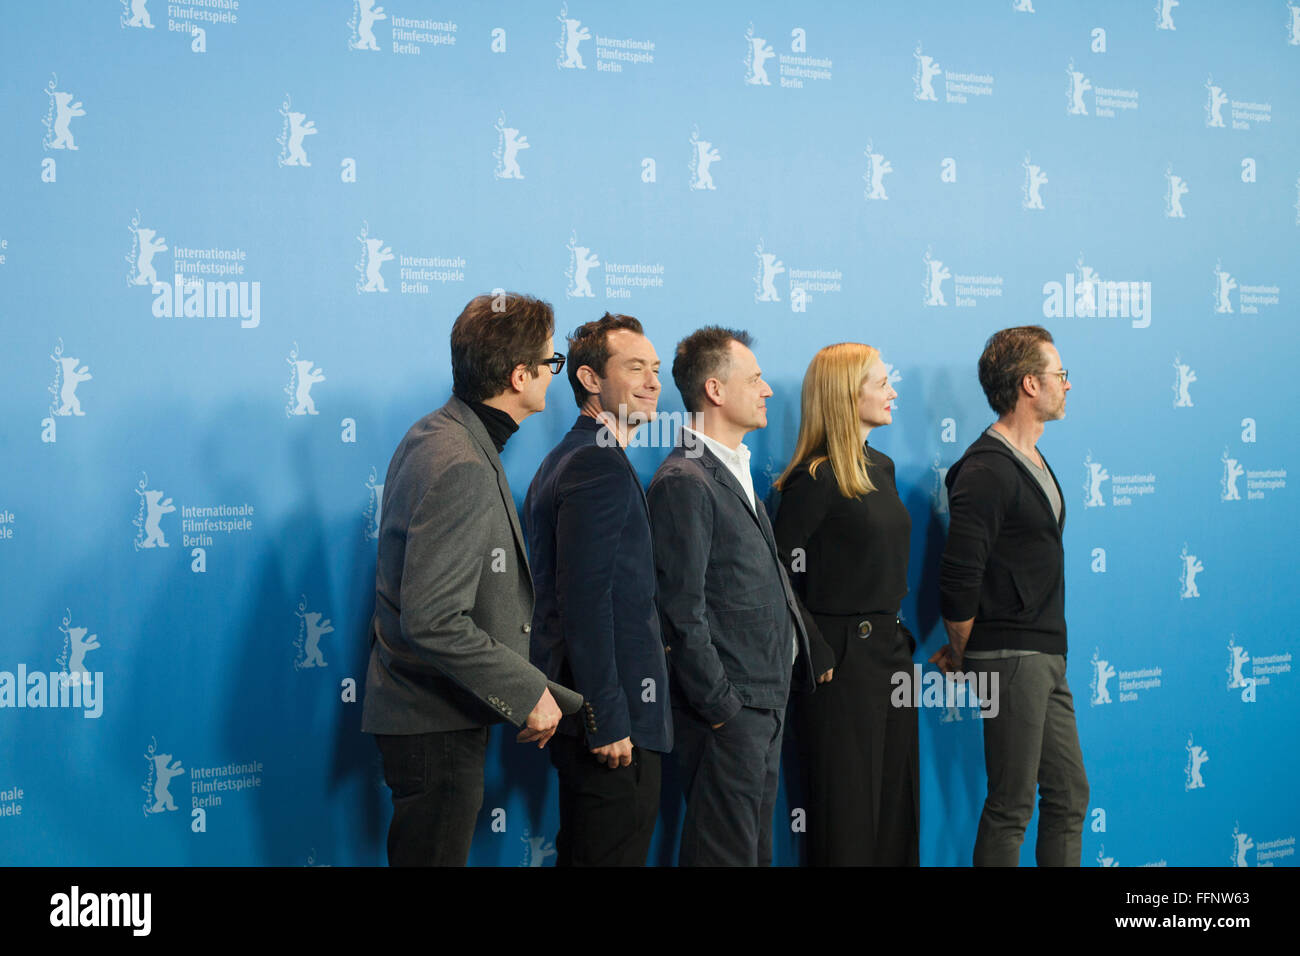 Berlin, Germany. 16th February, 2016. Actors Colin Firth, Jude Law, director Michael Grandage, actors Laura Linney and Guy Pearce attend the 'Genius' photo call during the 66th Berlinale International Film Festival Berlin Credit:  Odeta Catana/Alamy Live News Stock Photo